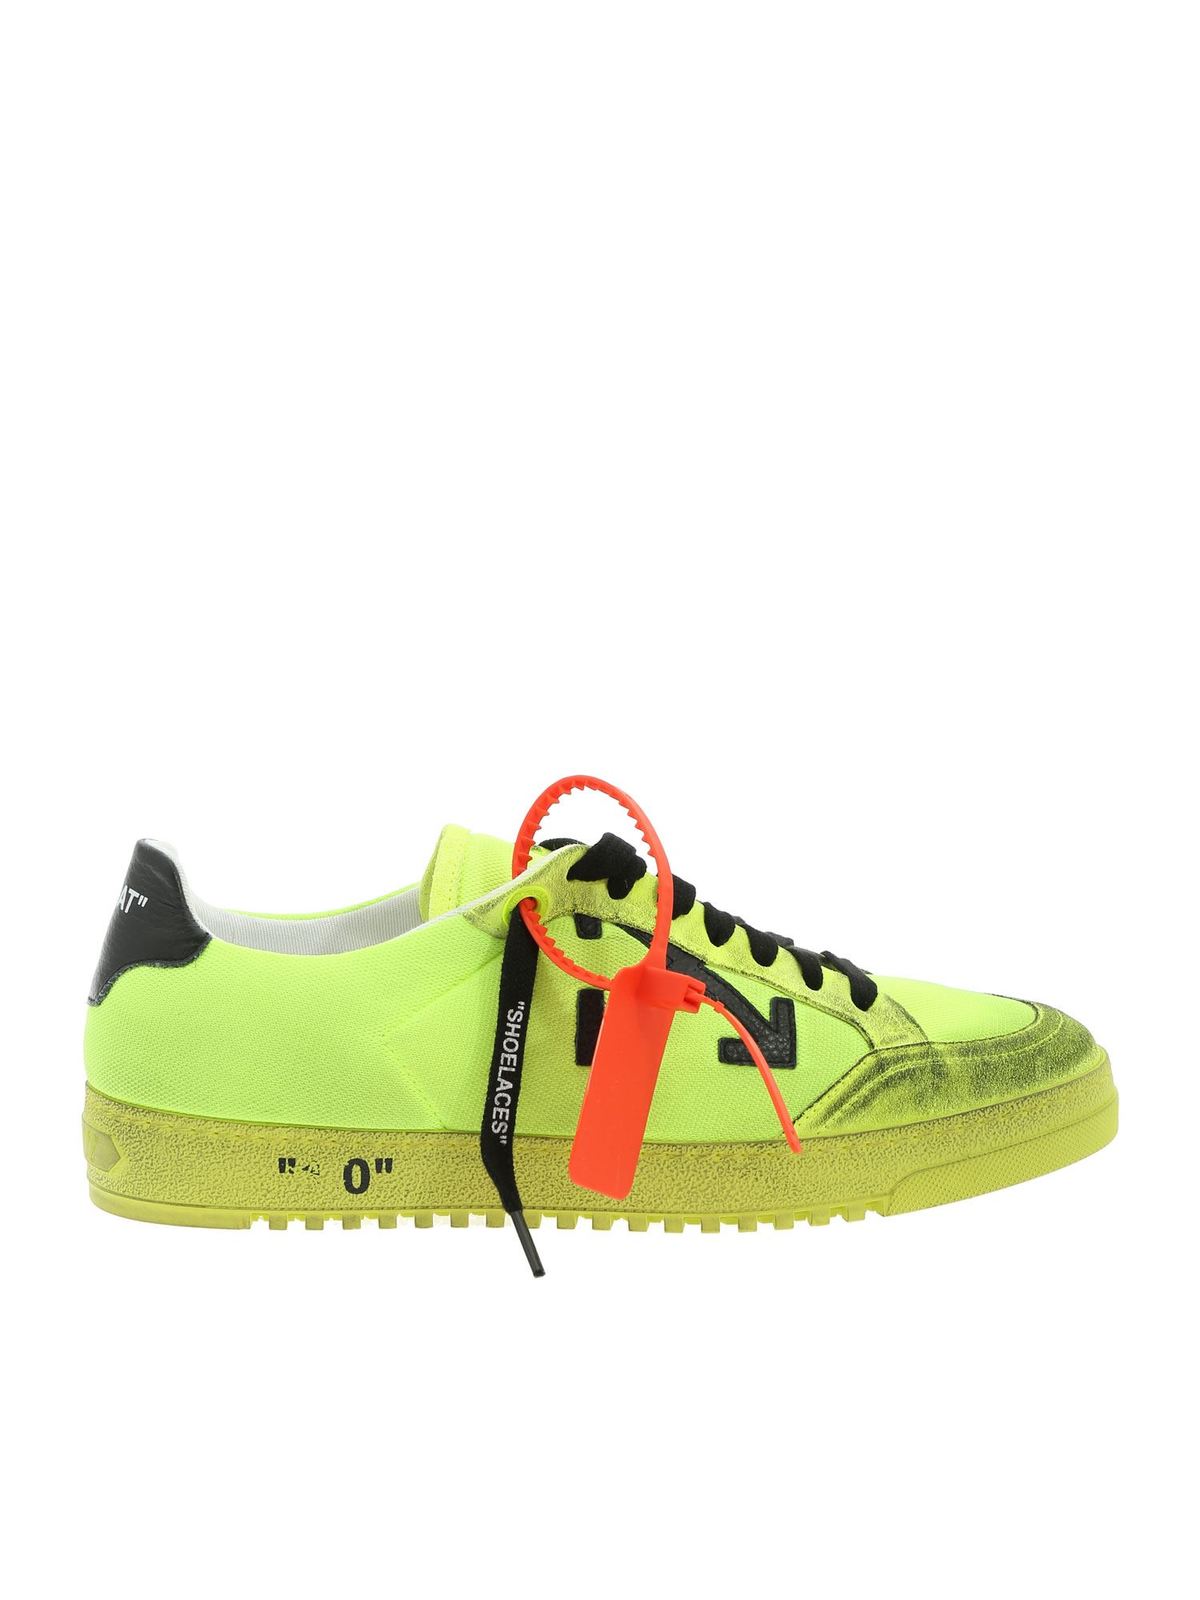 OFF-WHITE 20 SNEAKERS IN NEON YELLOW